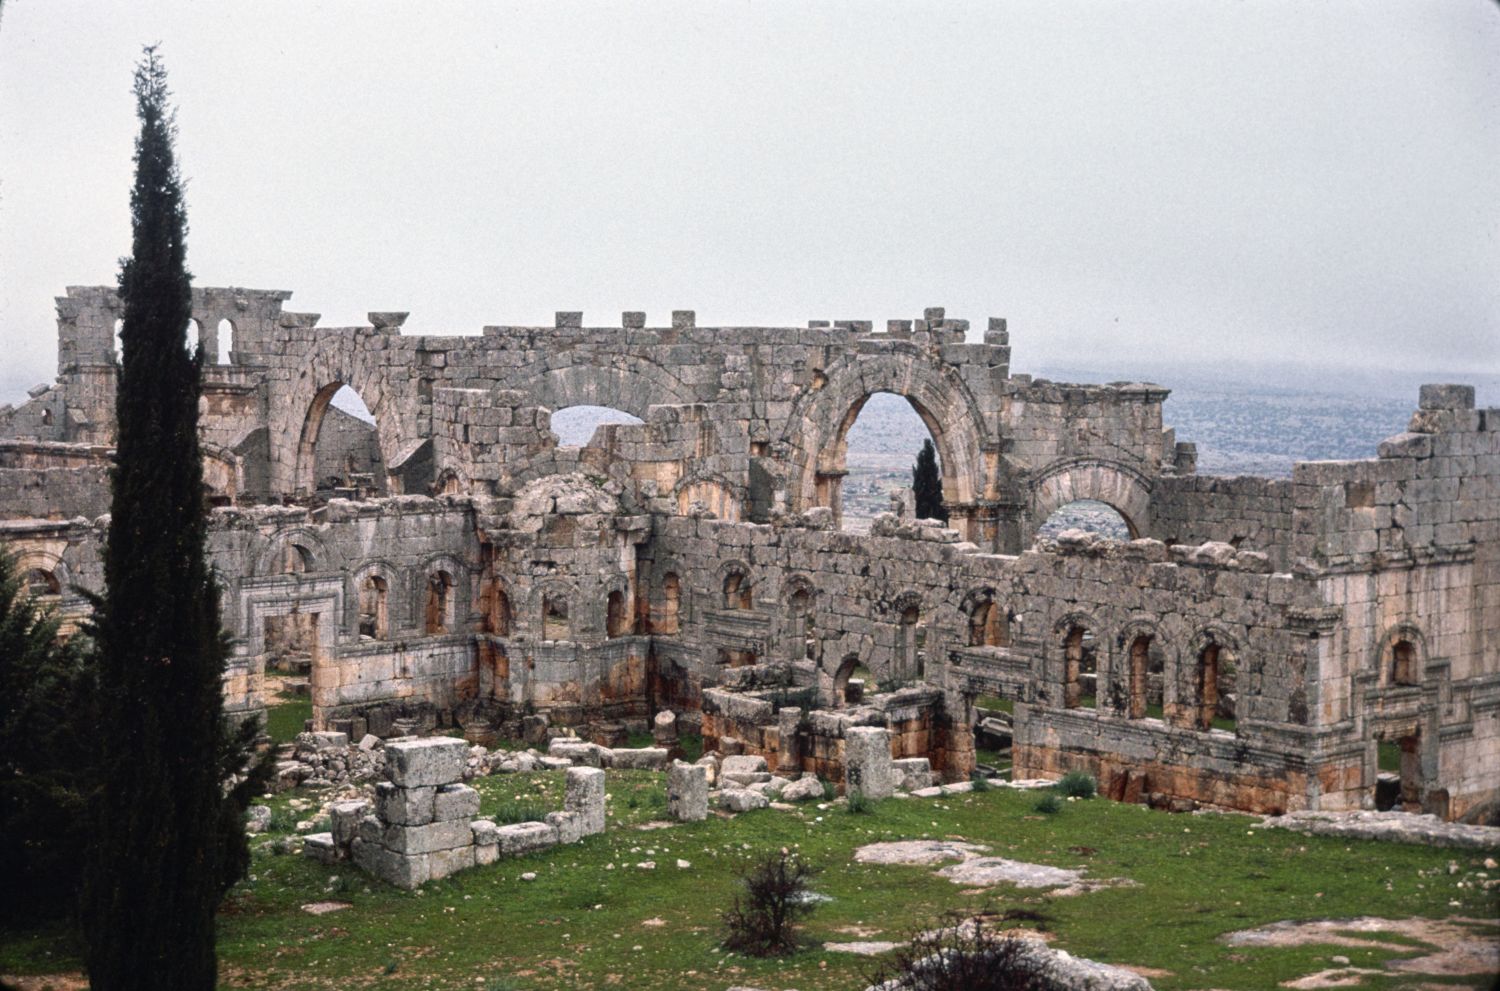 Martyrium, exterior view from northeast showing exterior walls of north and east basilicas. The walls of the central octagonal chamber rise in the background.